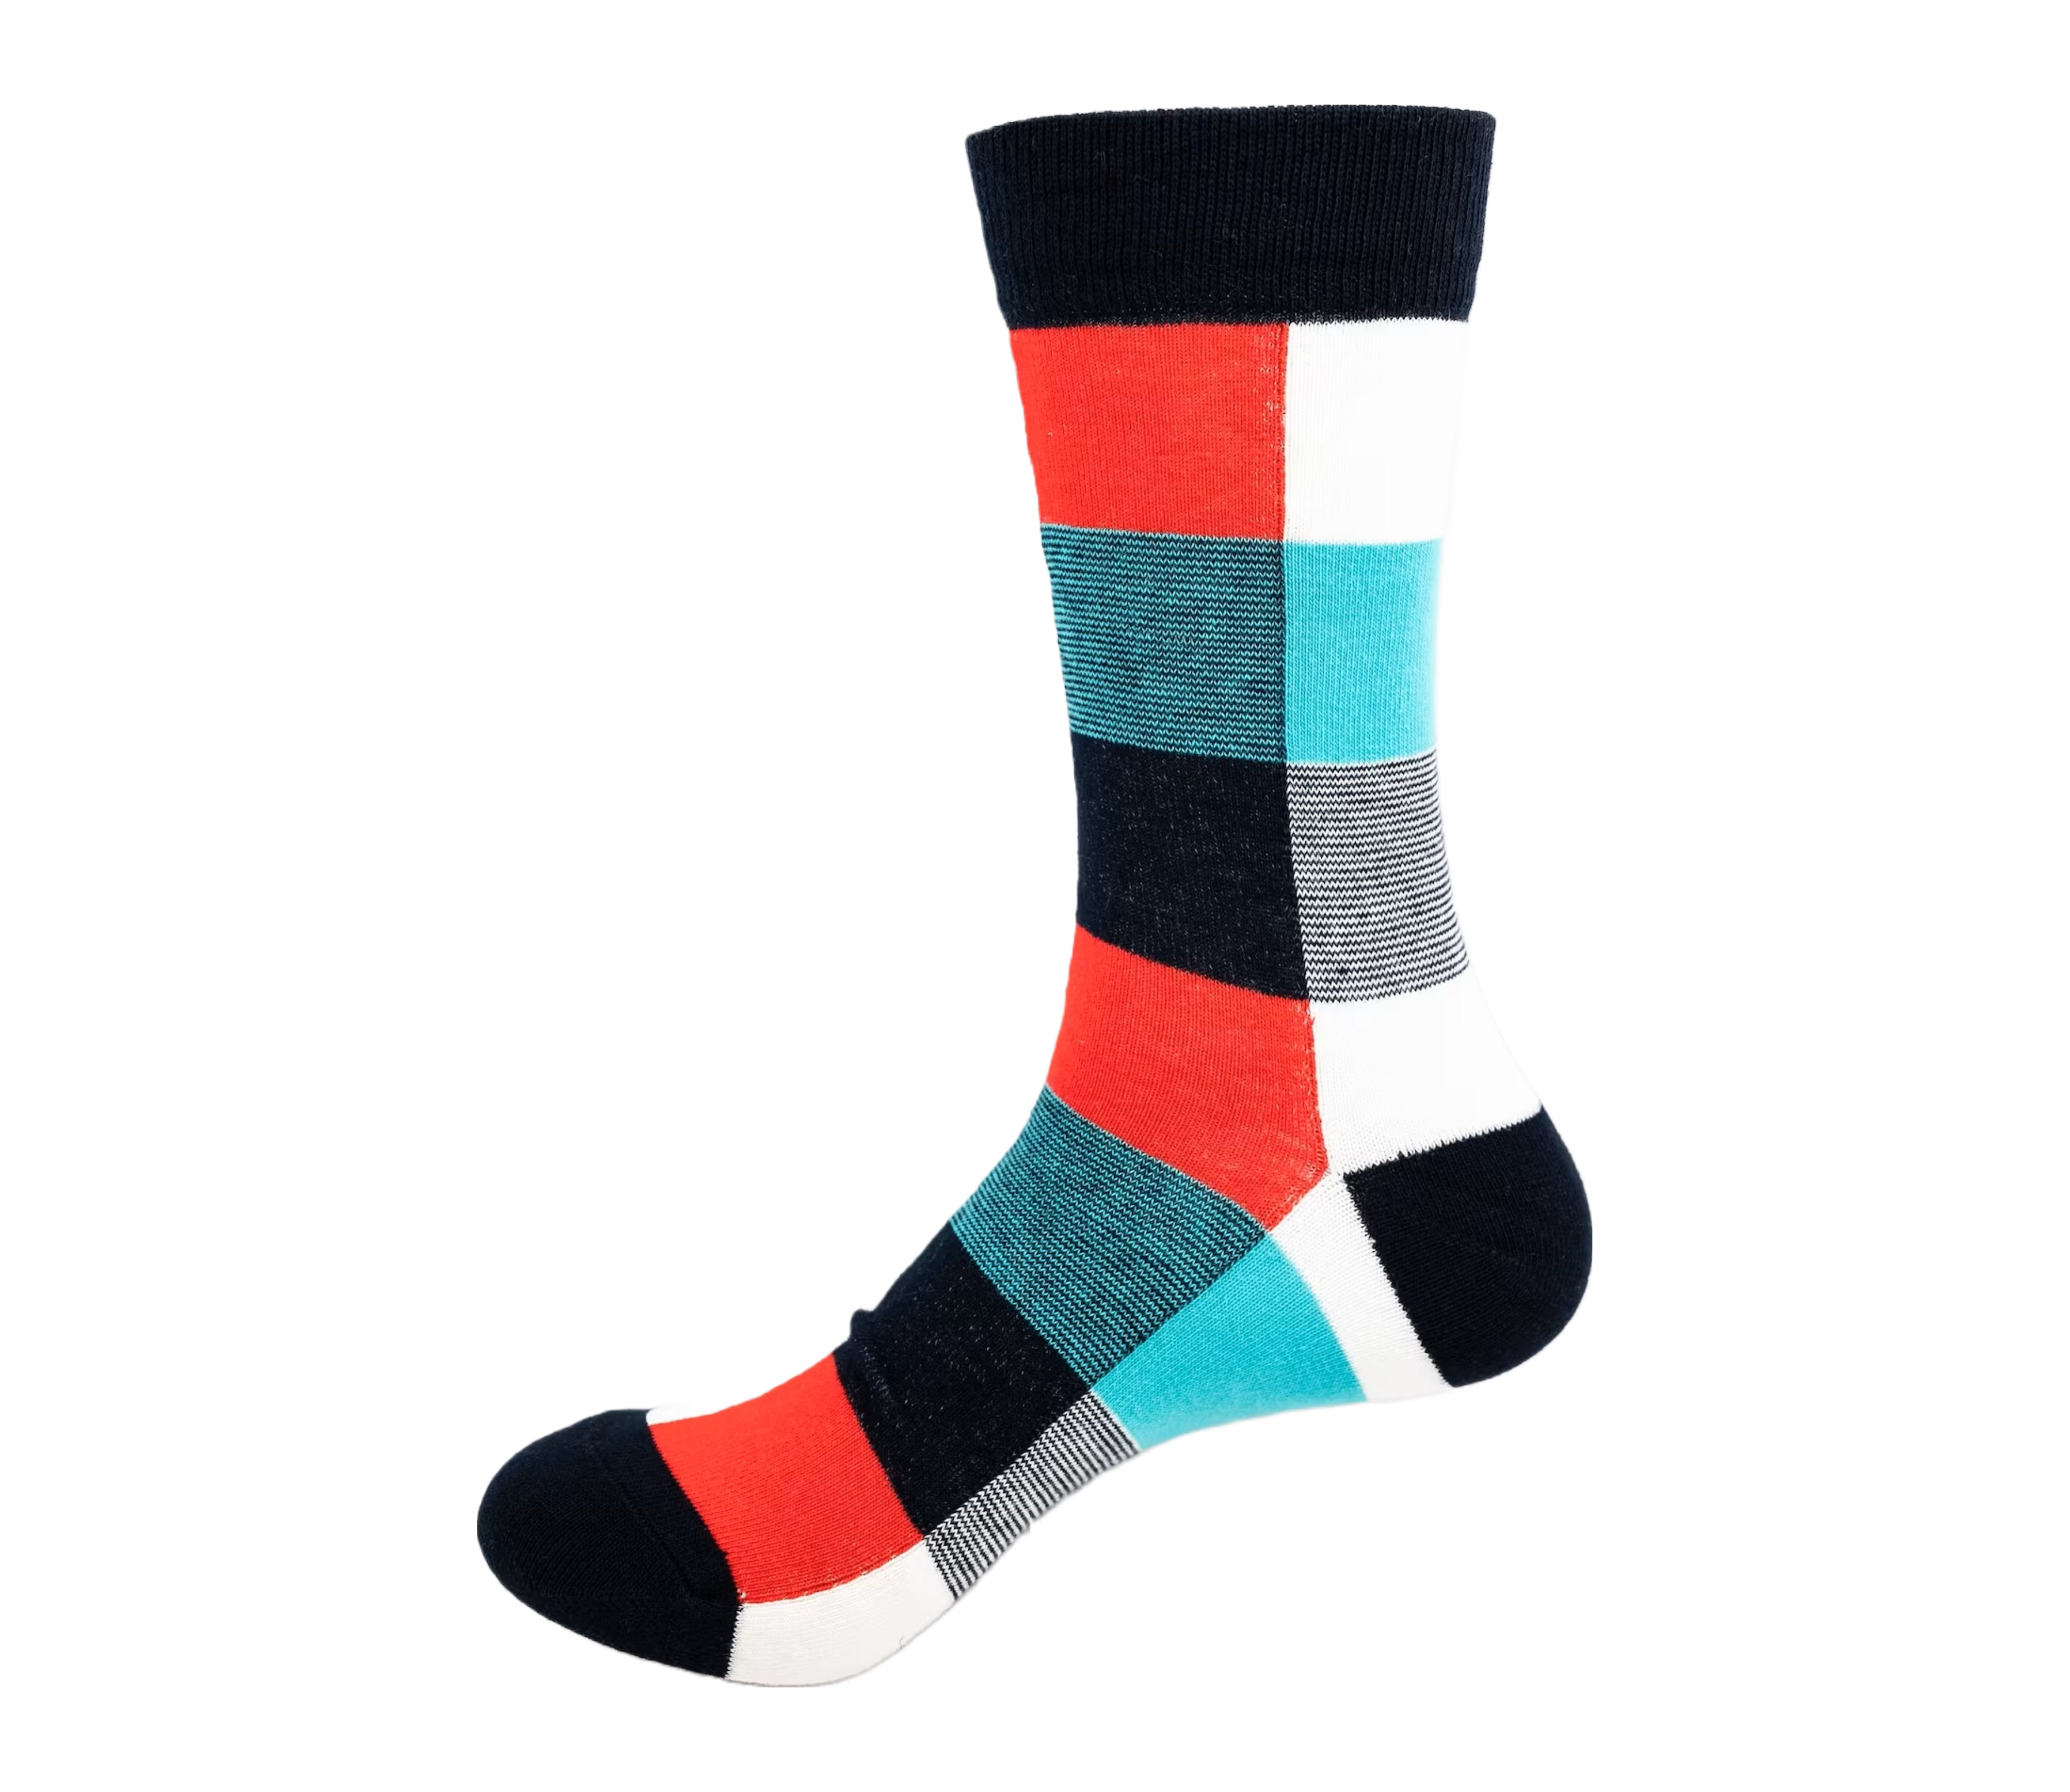 Colorful Plaid Patterned Socks from the Sock Panda (Adult Large)